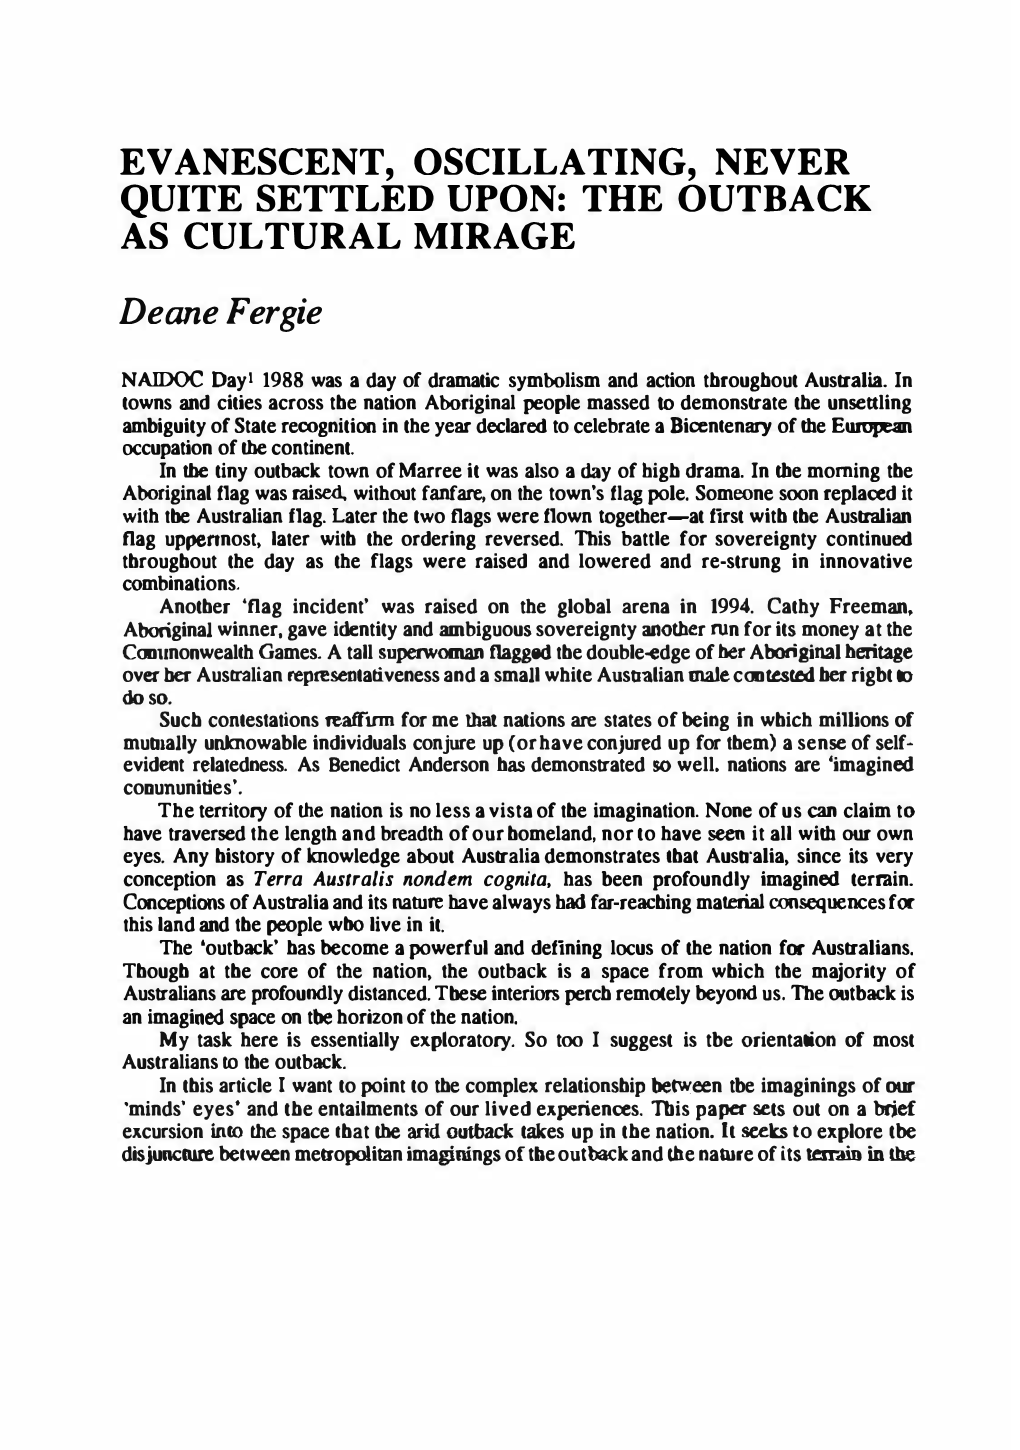 The Outback As Cultural Mirage